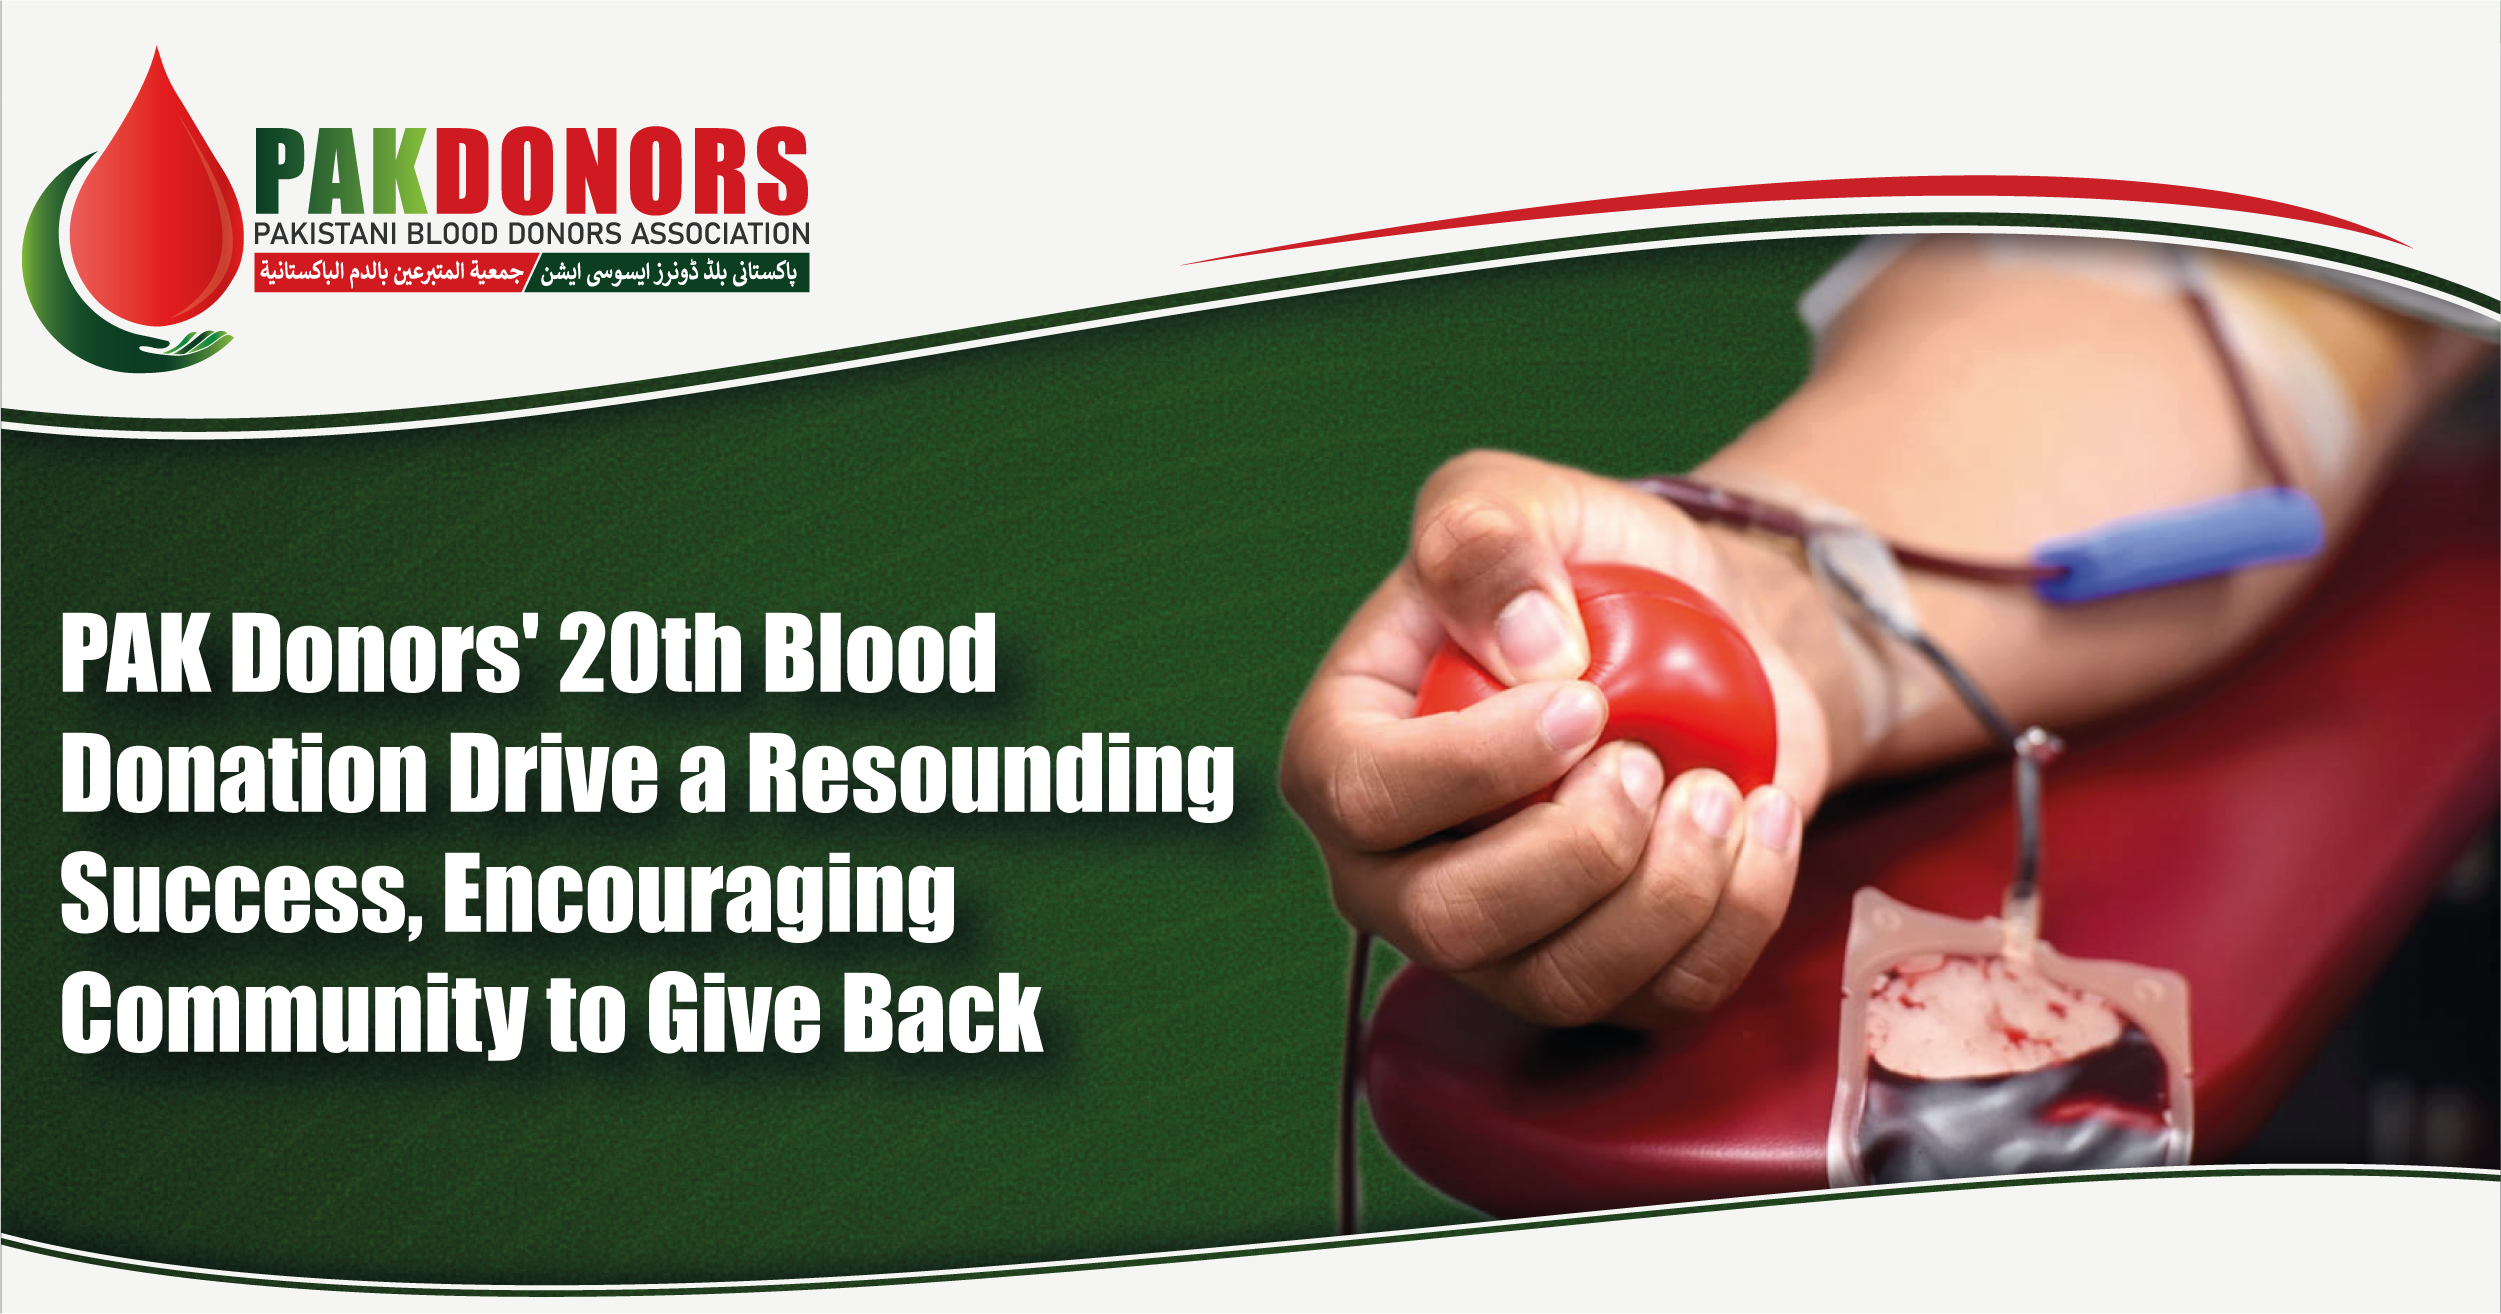 PAK Donors' 20th Blood Donation Drive in Kuwait a Resounding Success, Encouraging Community to Give Back